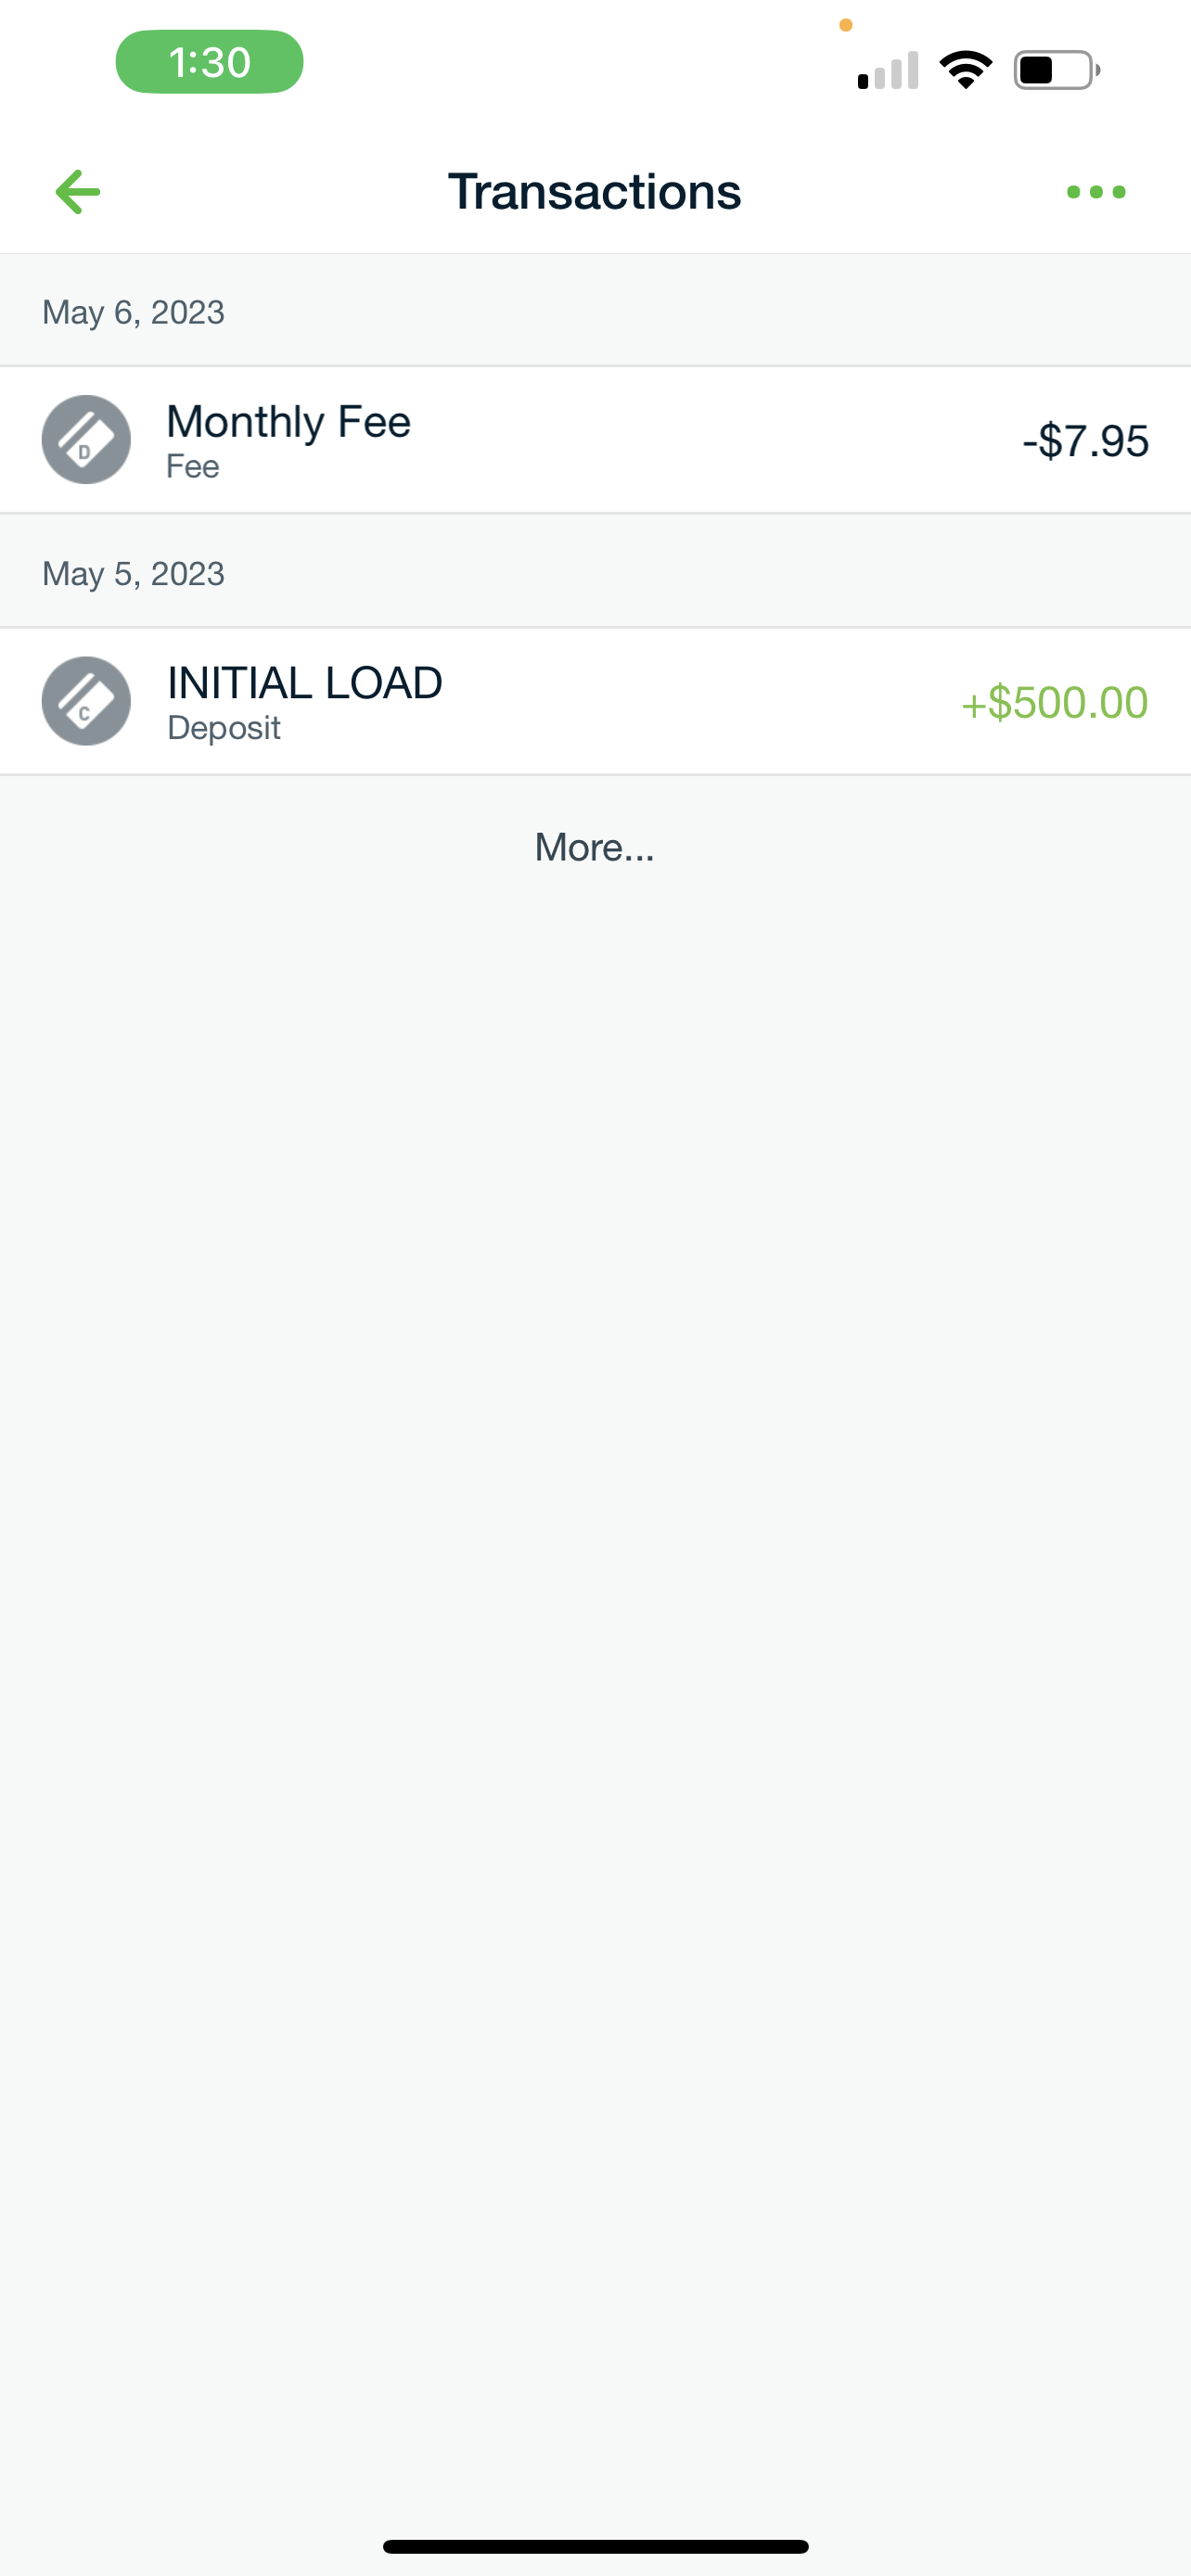 500.00 disappeared out of my account